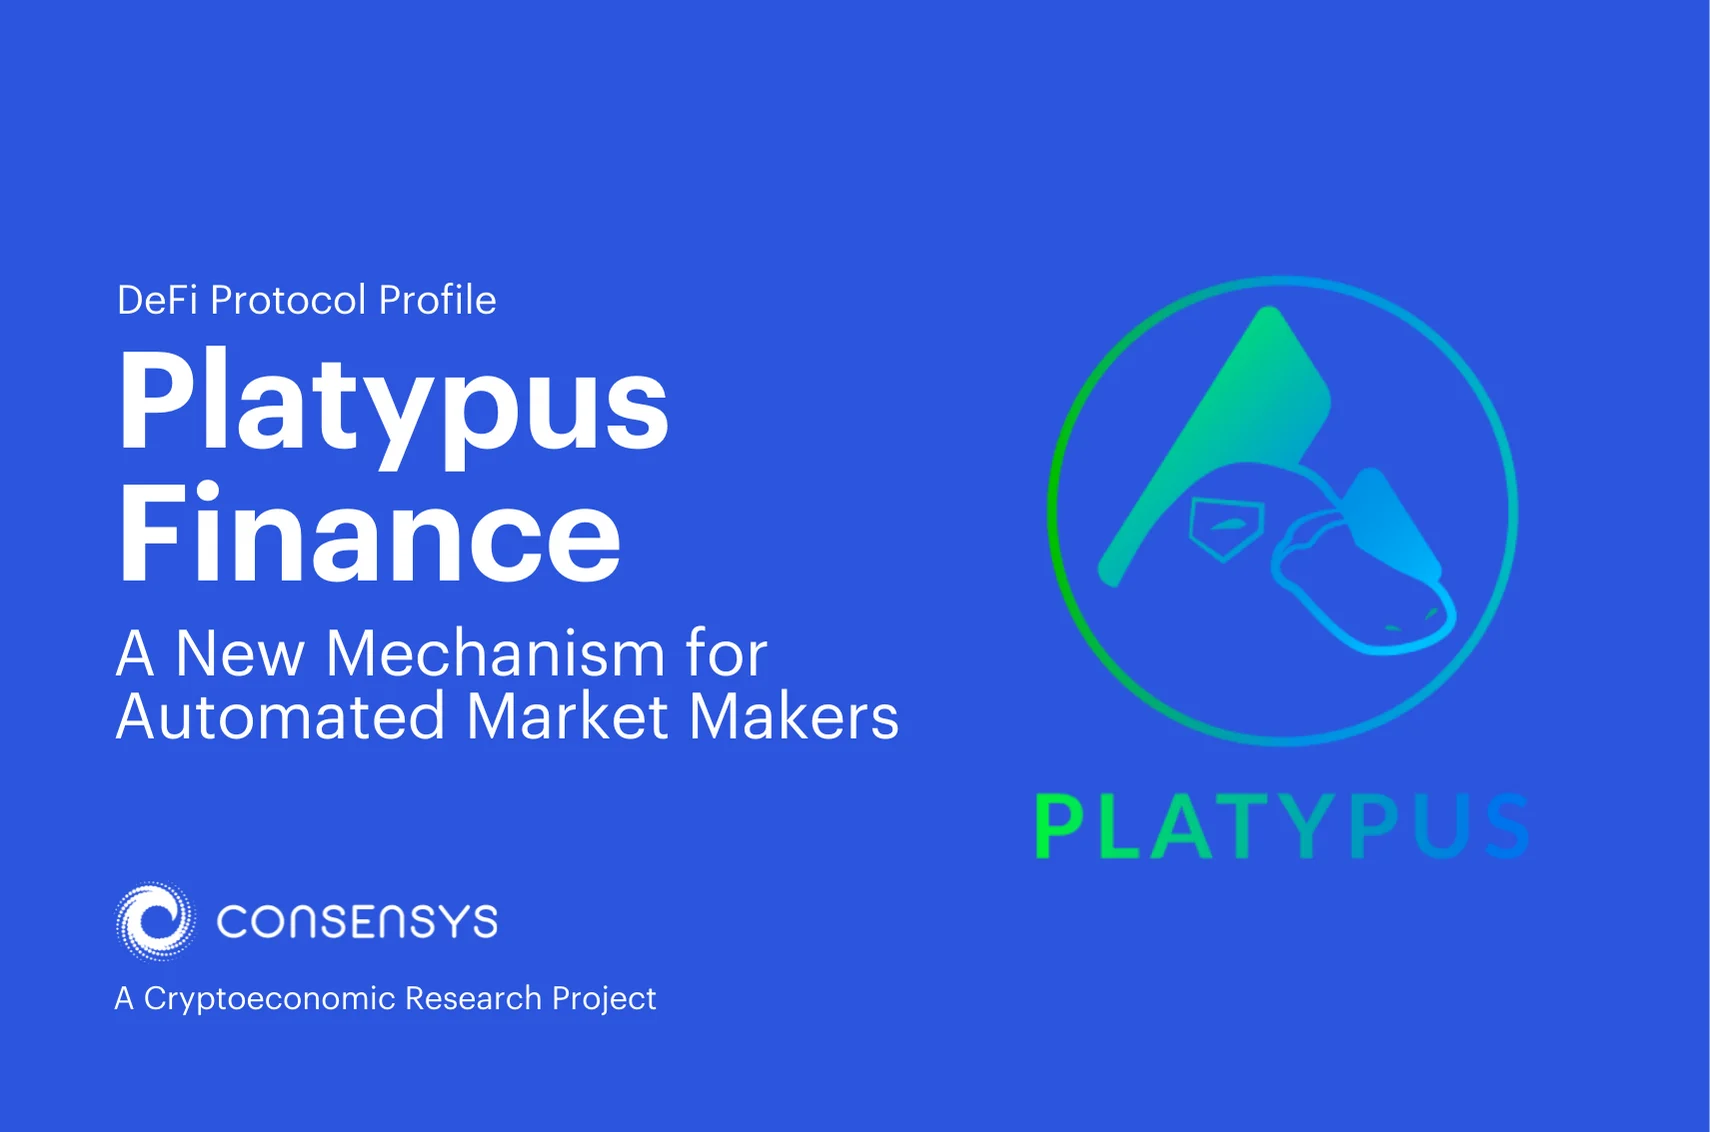 Image: Platypus Finance: A New Mechanism for Automated Market Makers